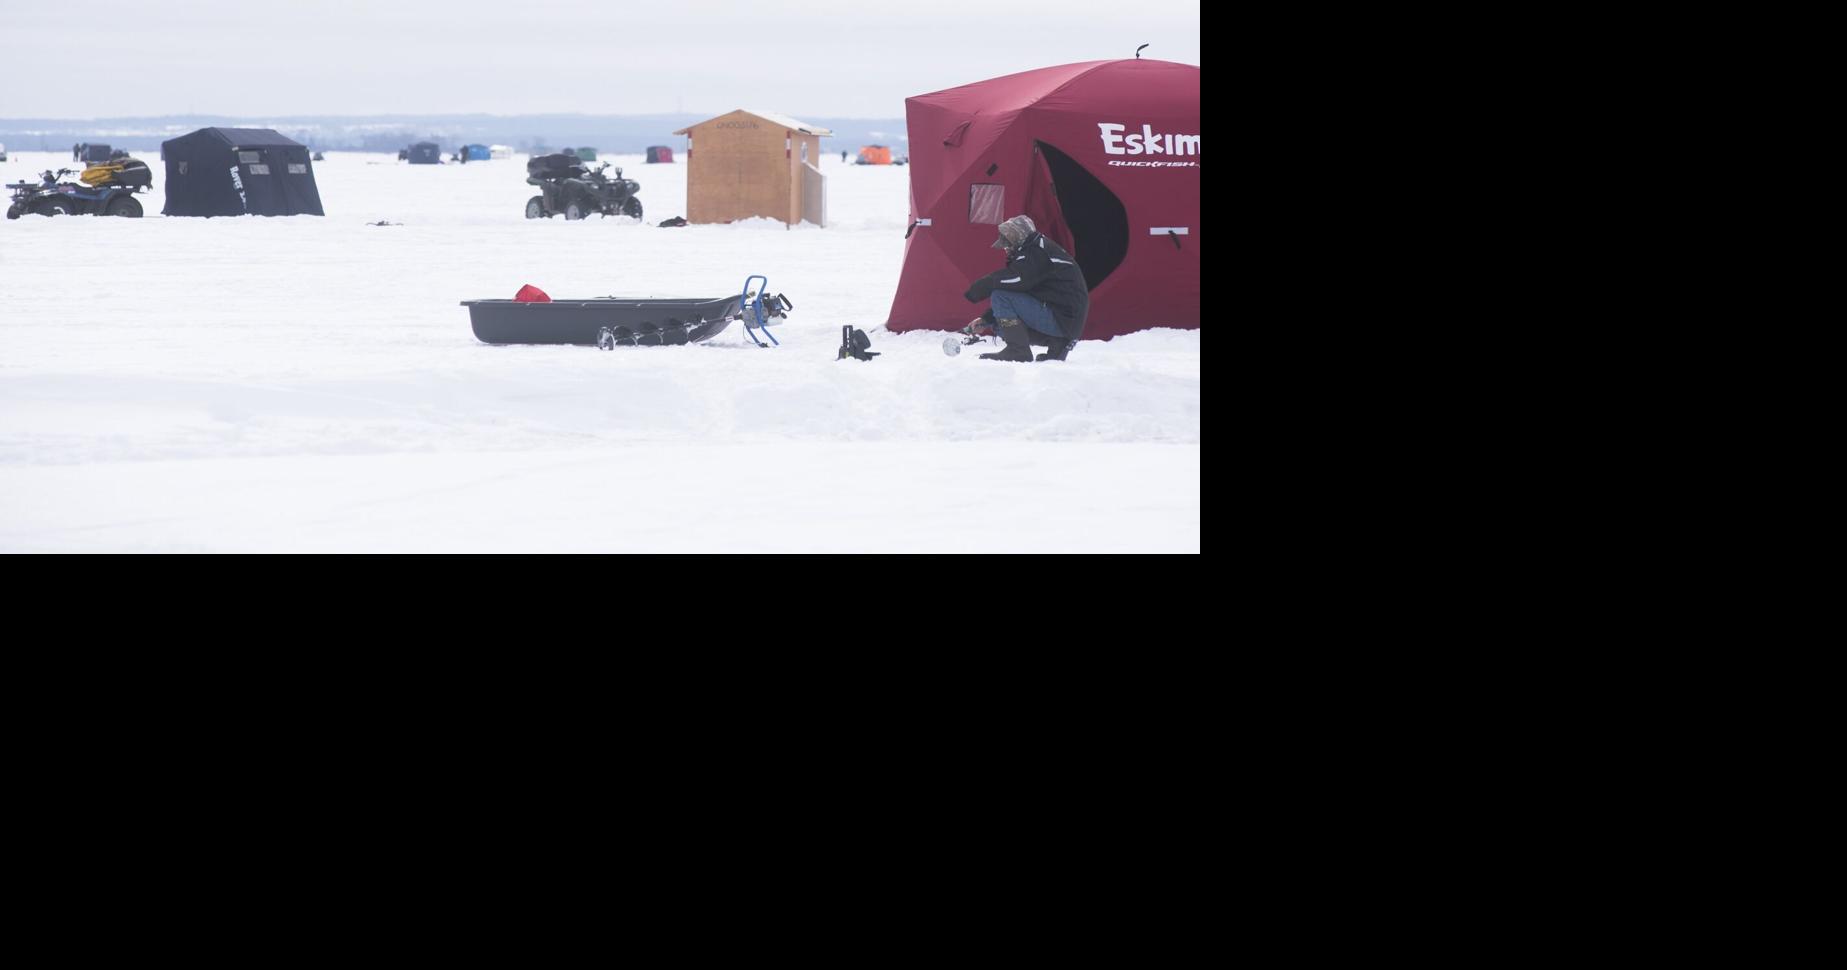 Anglers Reminded Of March Deadline To Remove Ice Fishing Shelters